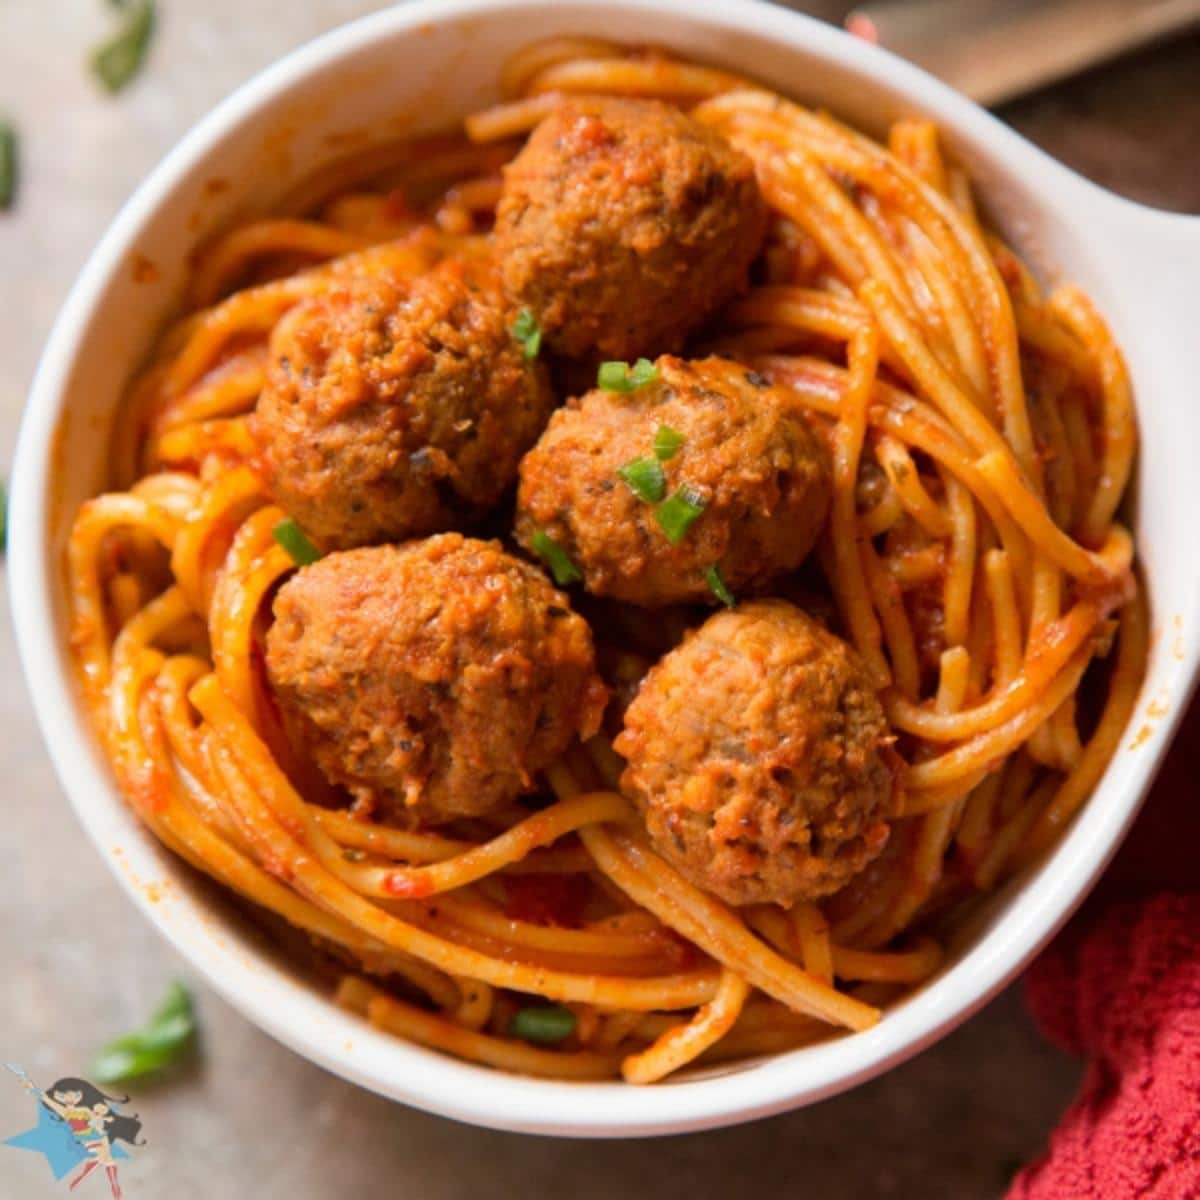 A white bowl of Spaghetti and Meatballs on a table with a red cloth next to it.